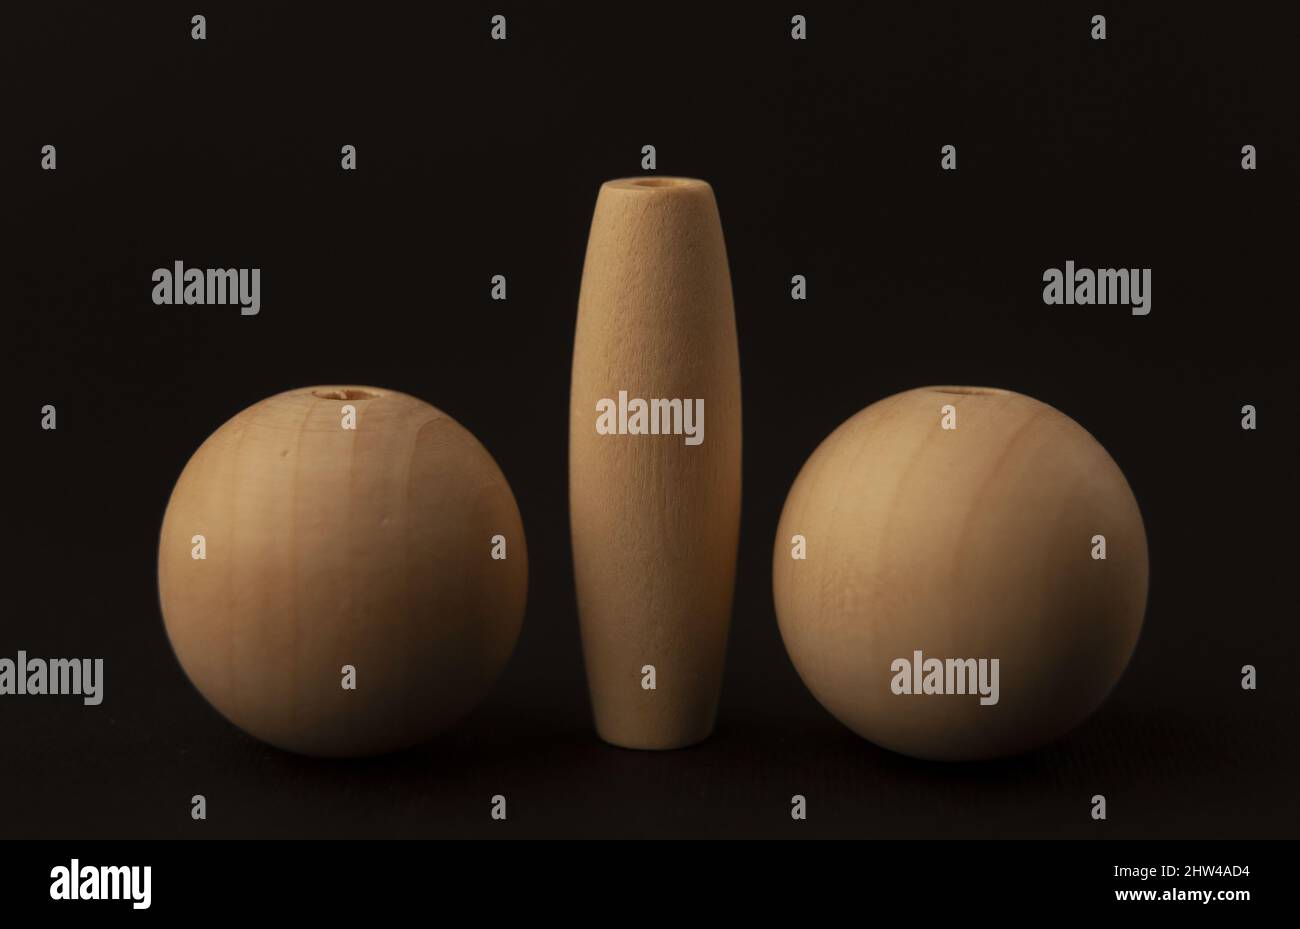 two wooden balls and cylinder on black background, big balls, close up Stock Photo